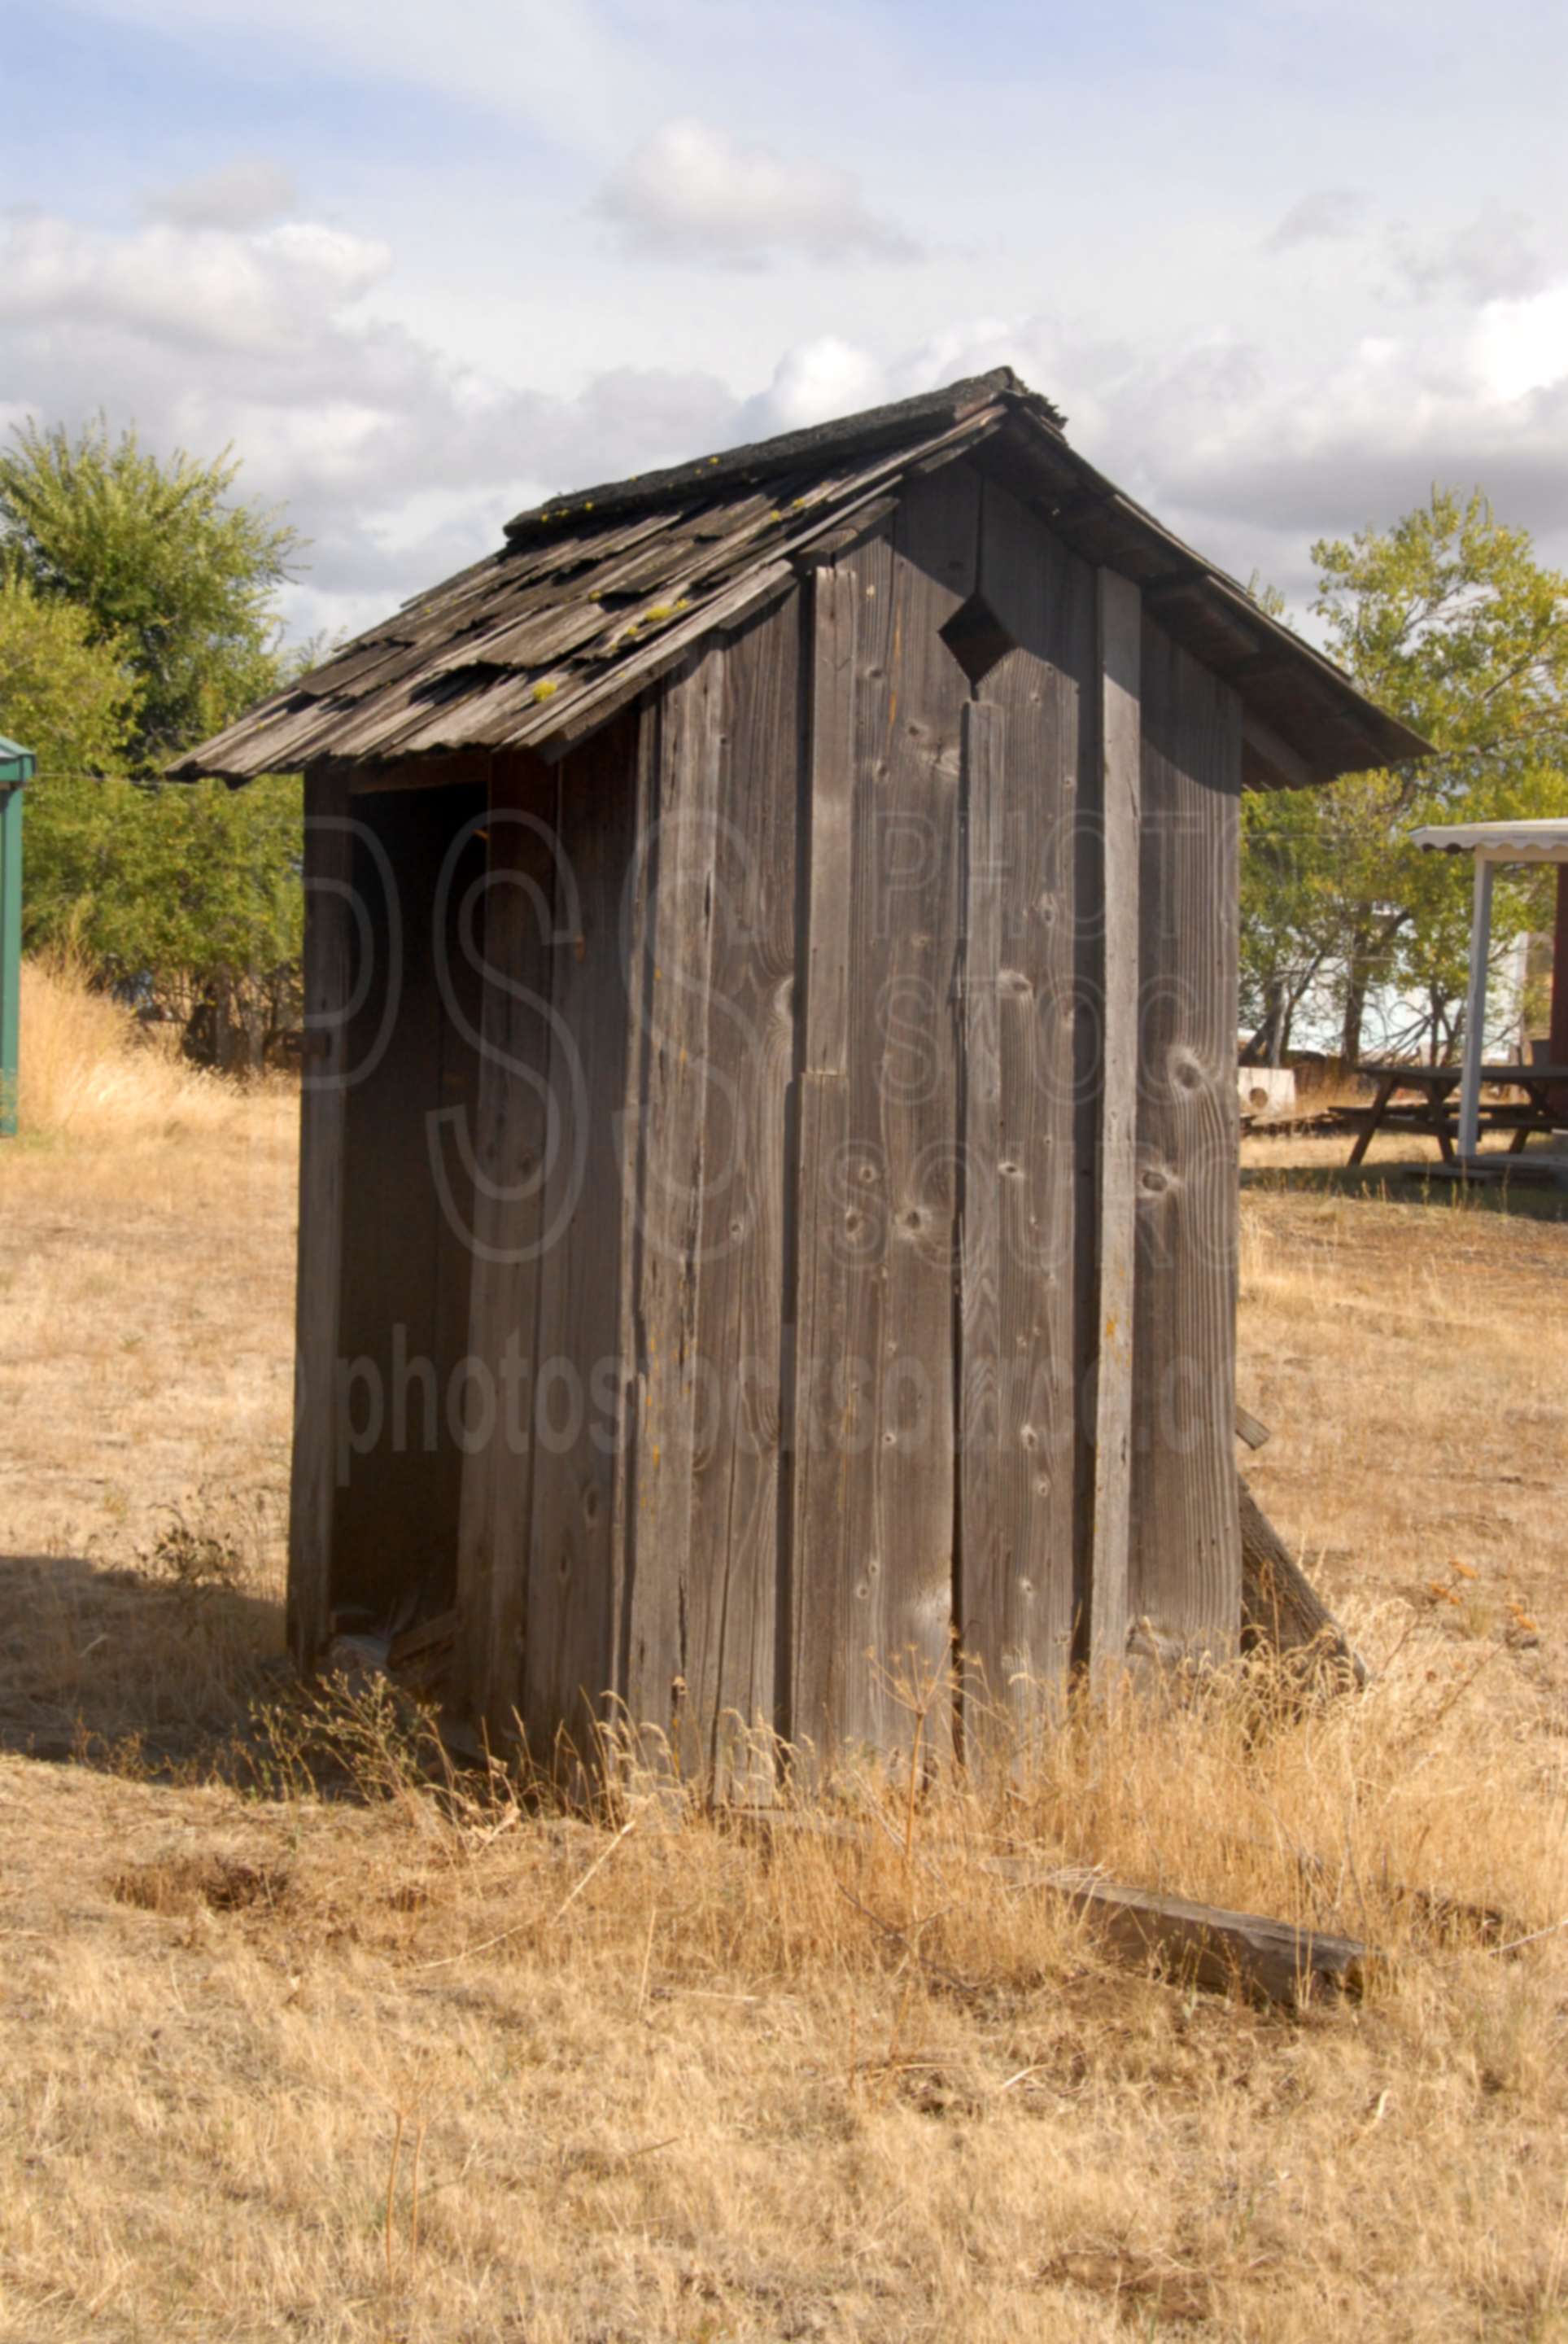 Outhouse,outhouse,out house,potty